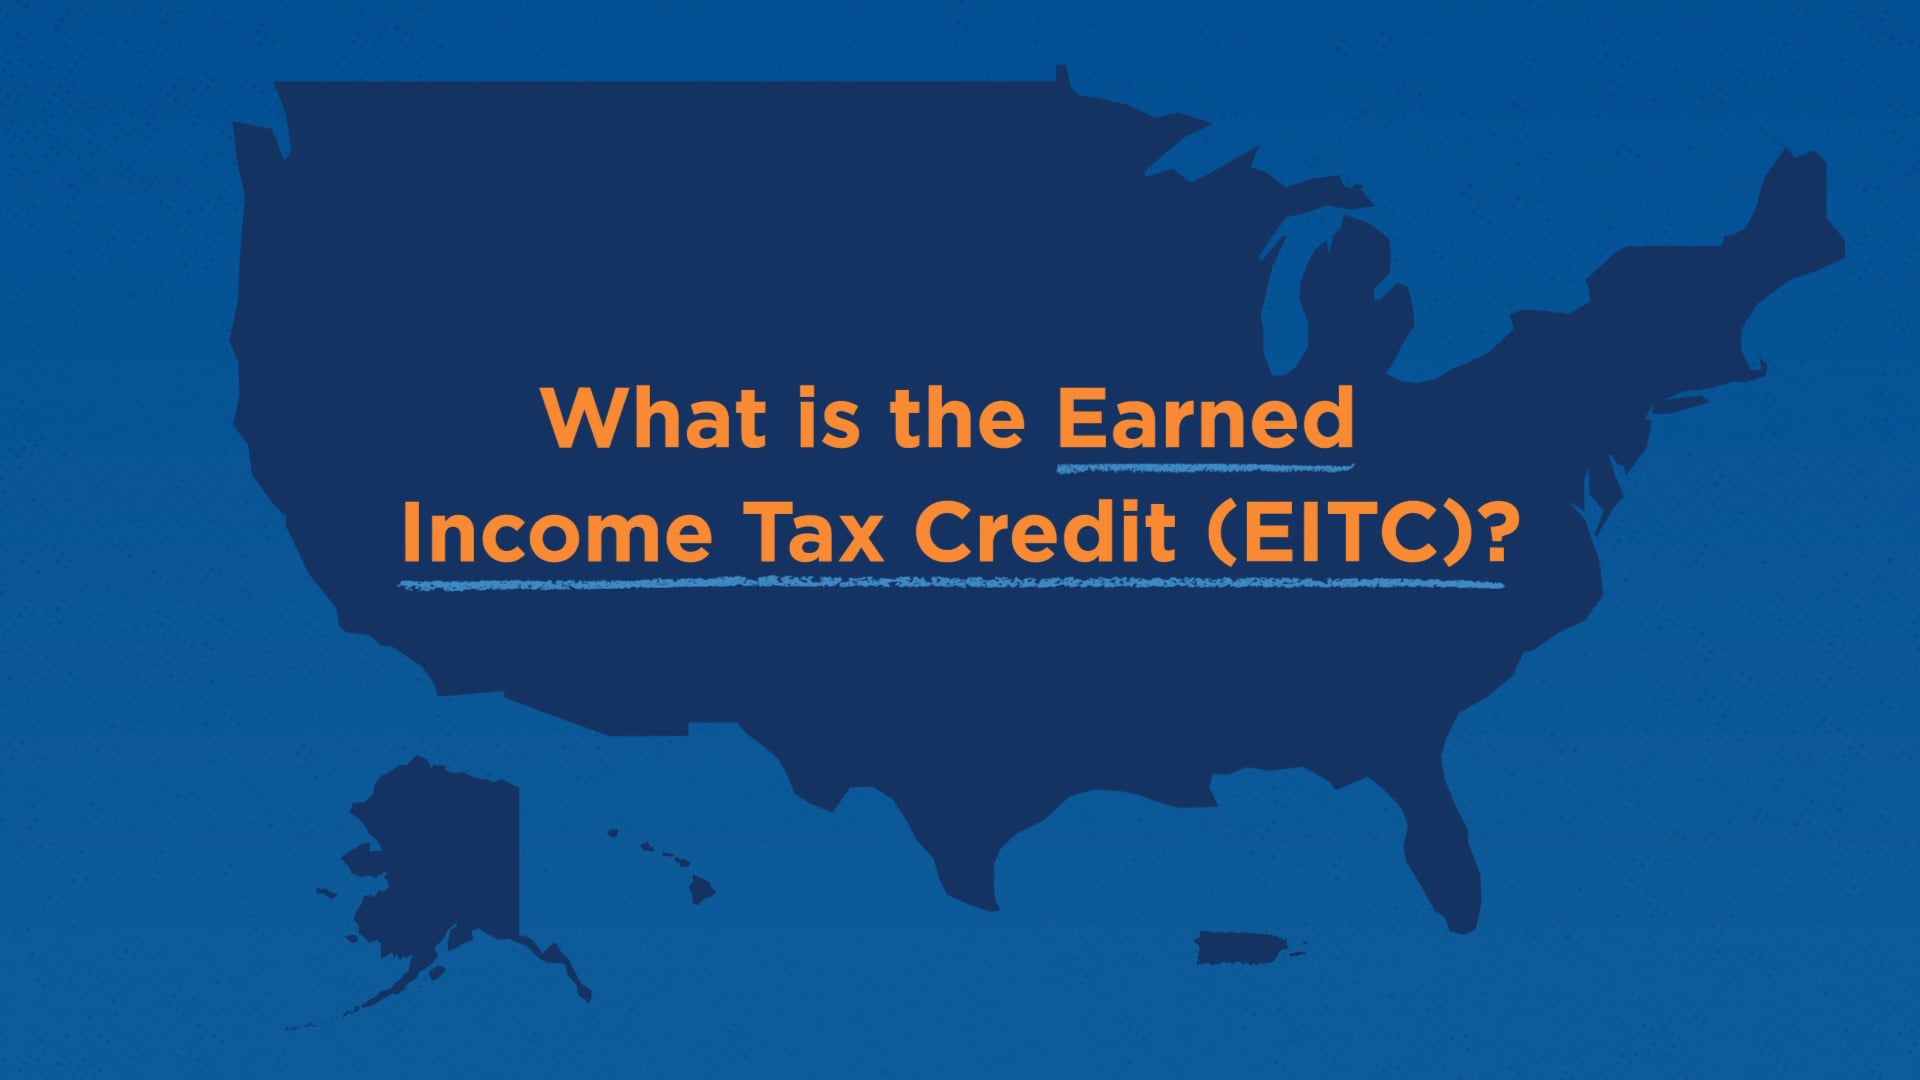 tax-credits-for-working-families-what-is-the-earned-income-tax-credit